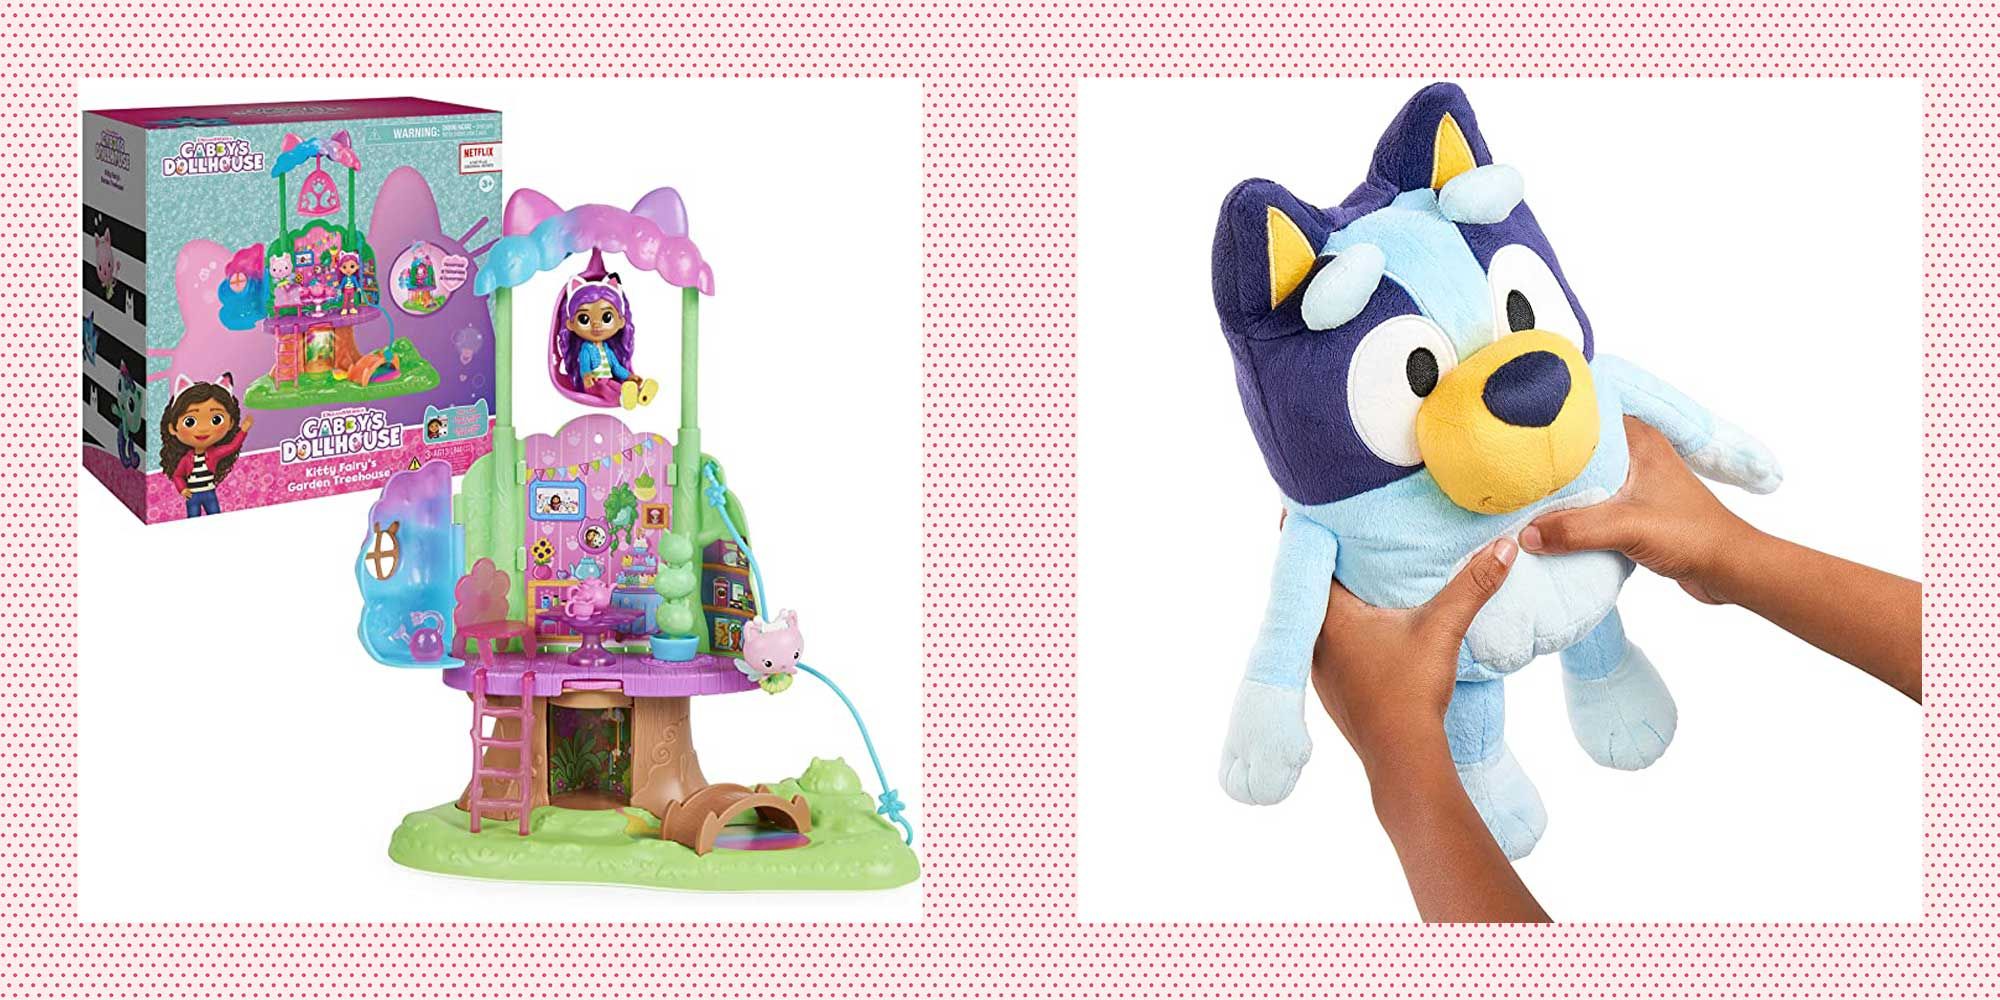 Most Awesome Toys and Gifts For 4 Year Old Girls 2022 - ToyBuzz